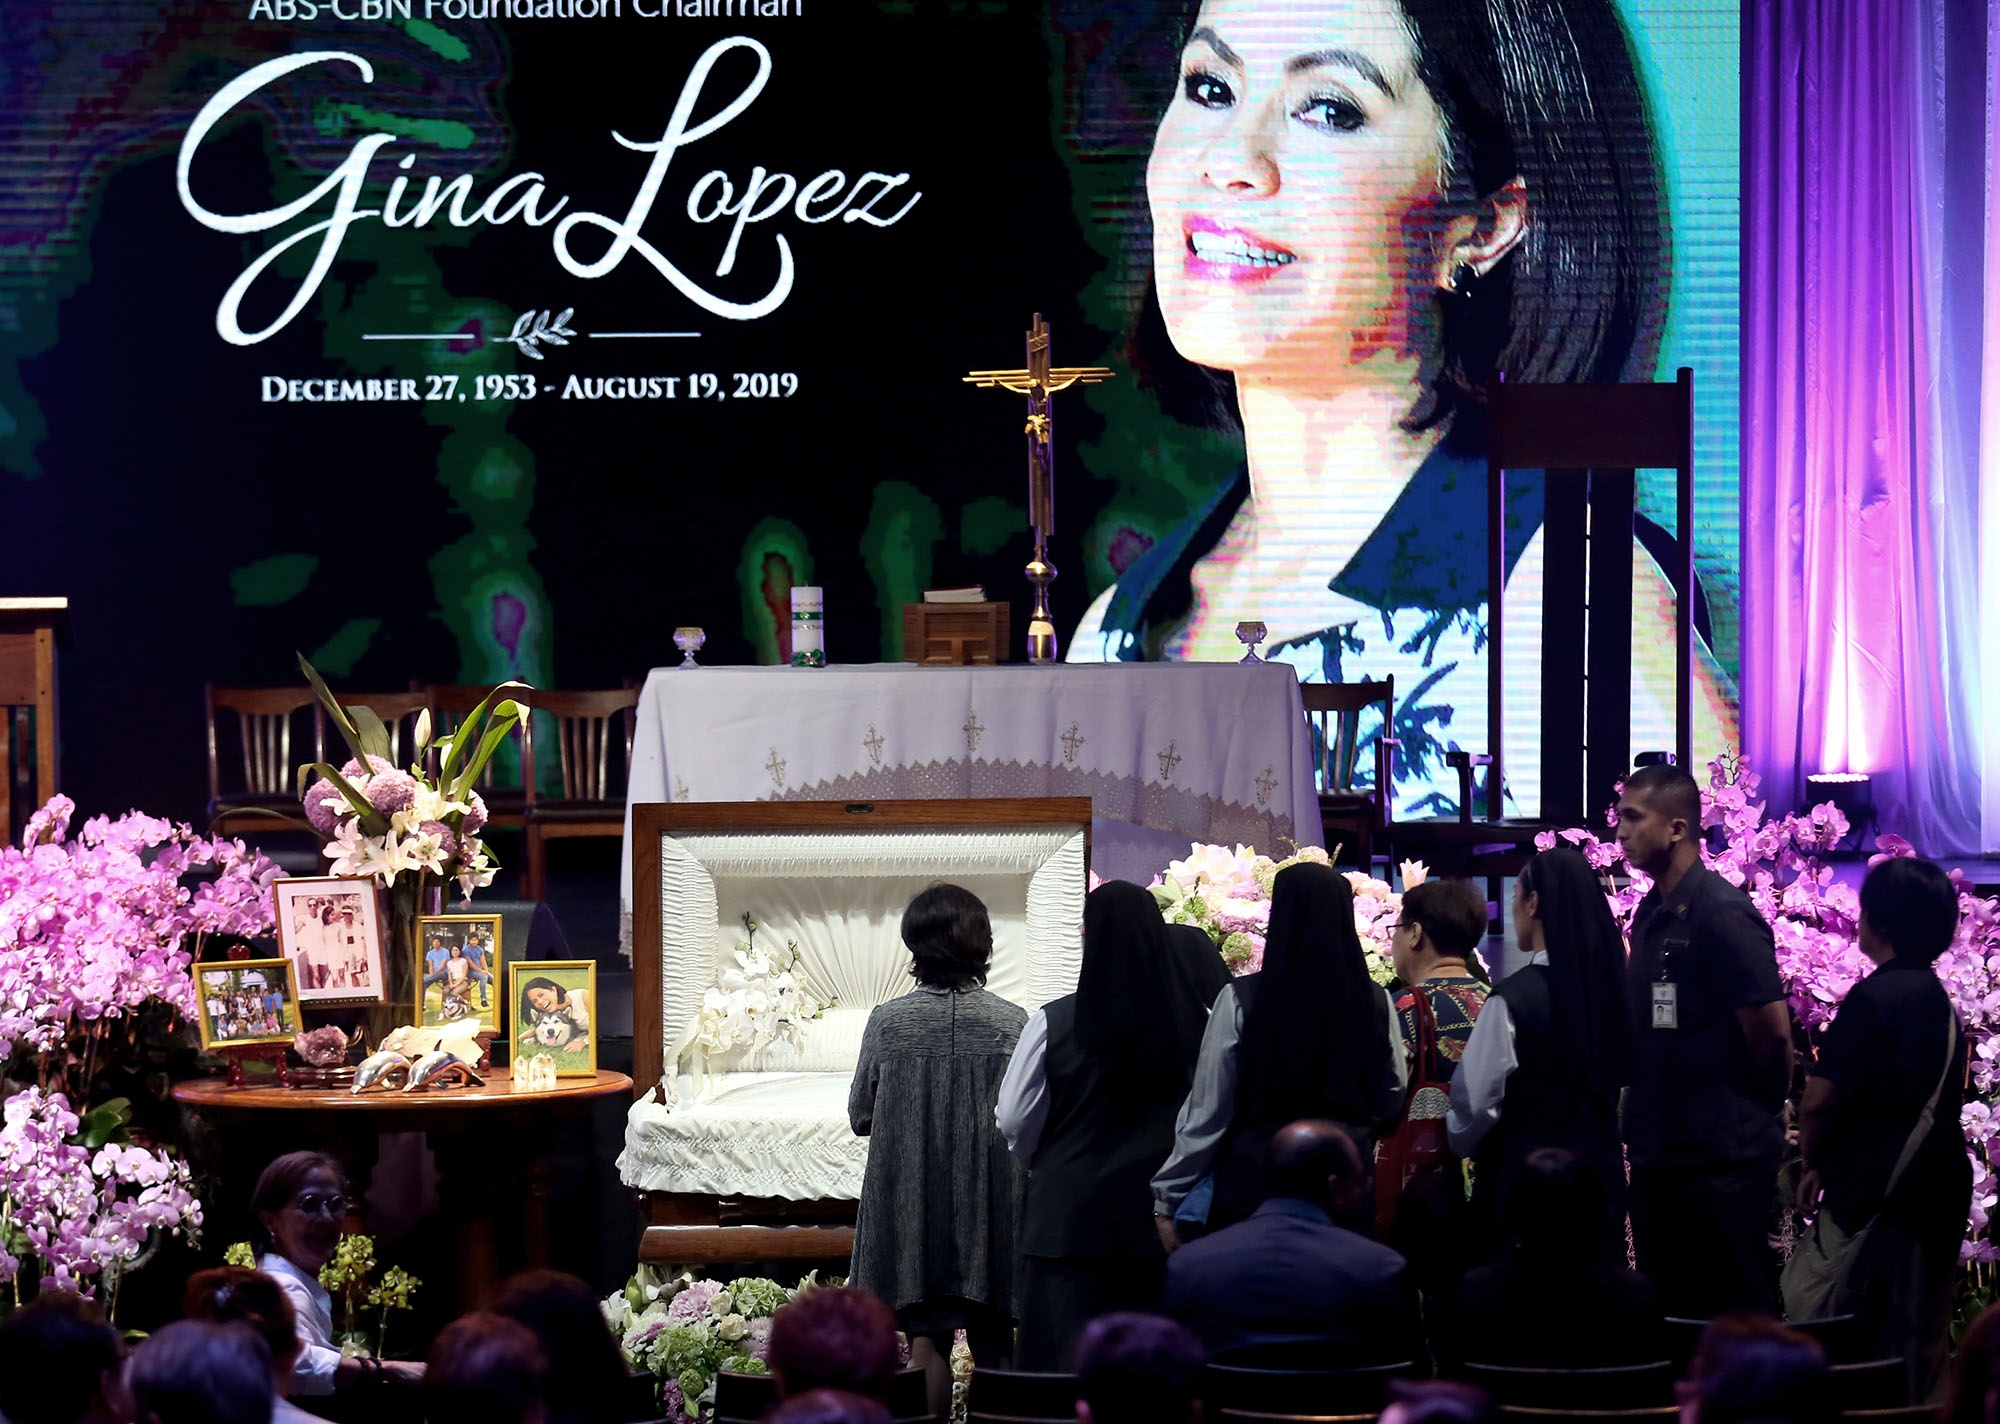 The heart and soul of Gina Lopez